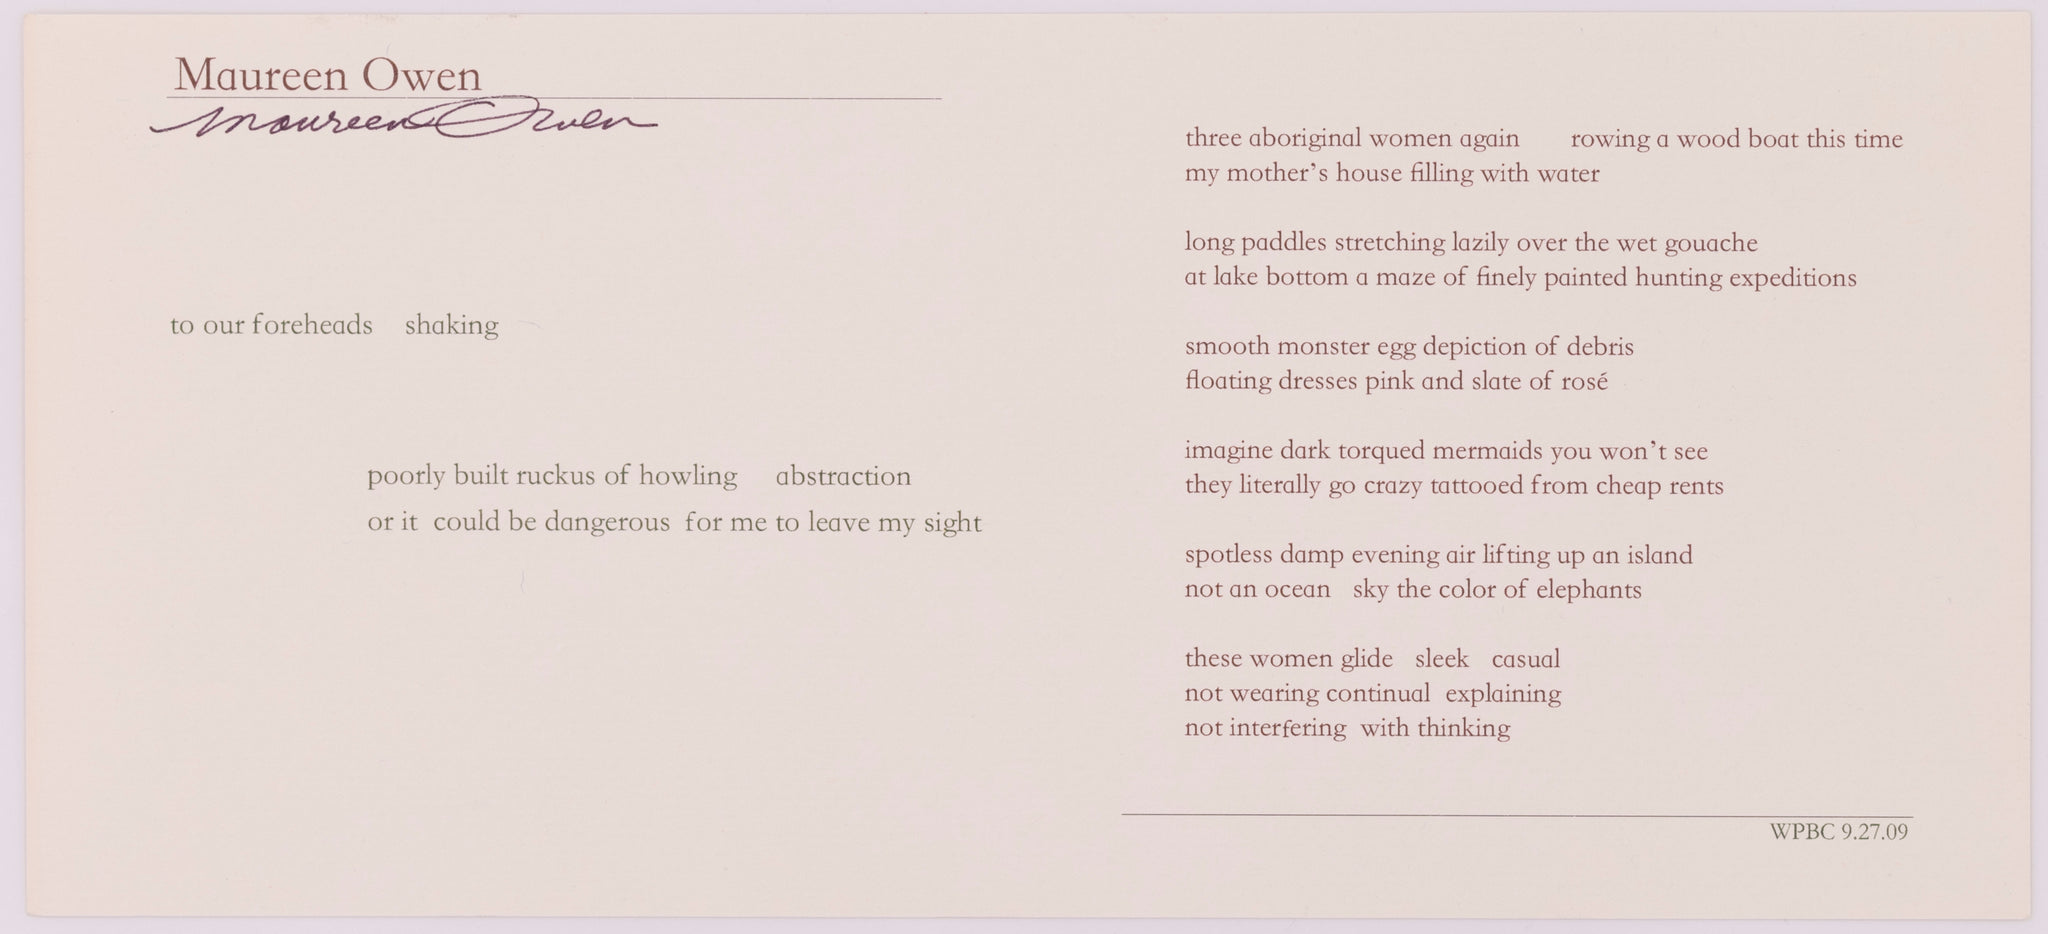 Broadside titled To our foreheads shaking by Maureen Owen. Redish brown and black text on grey paper